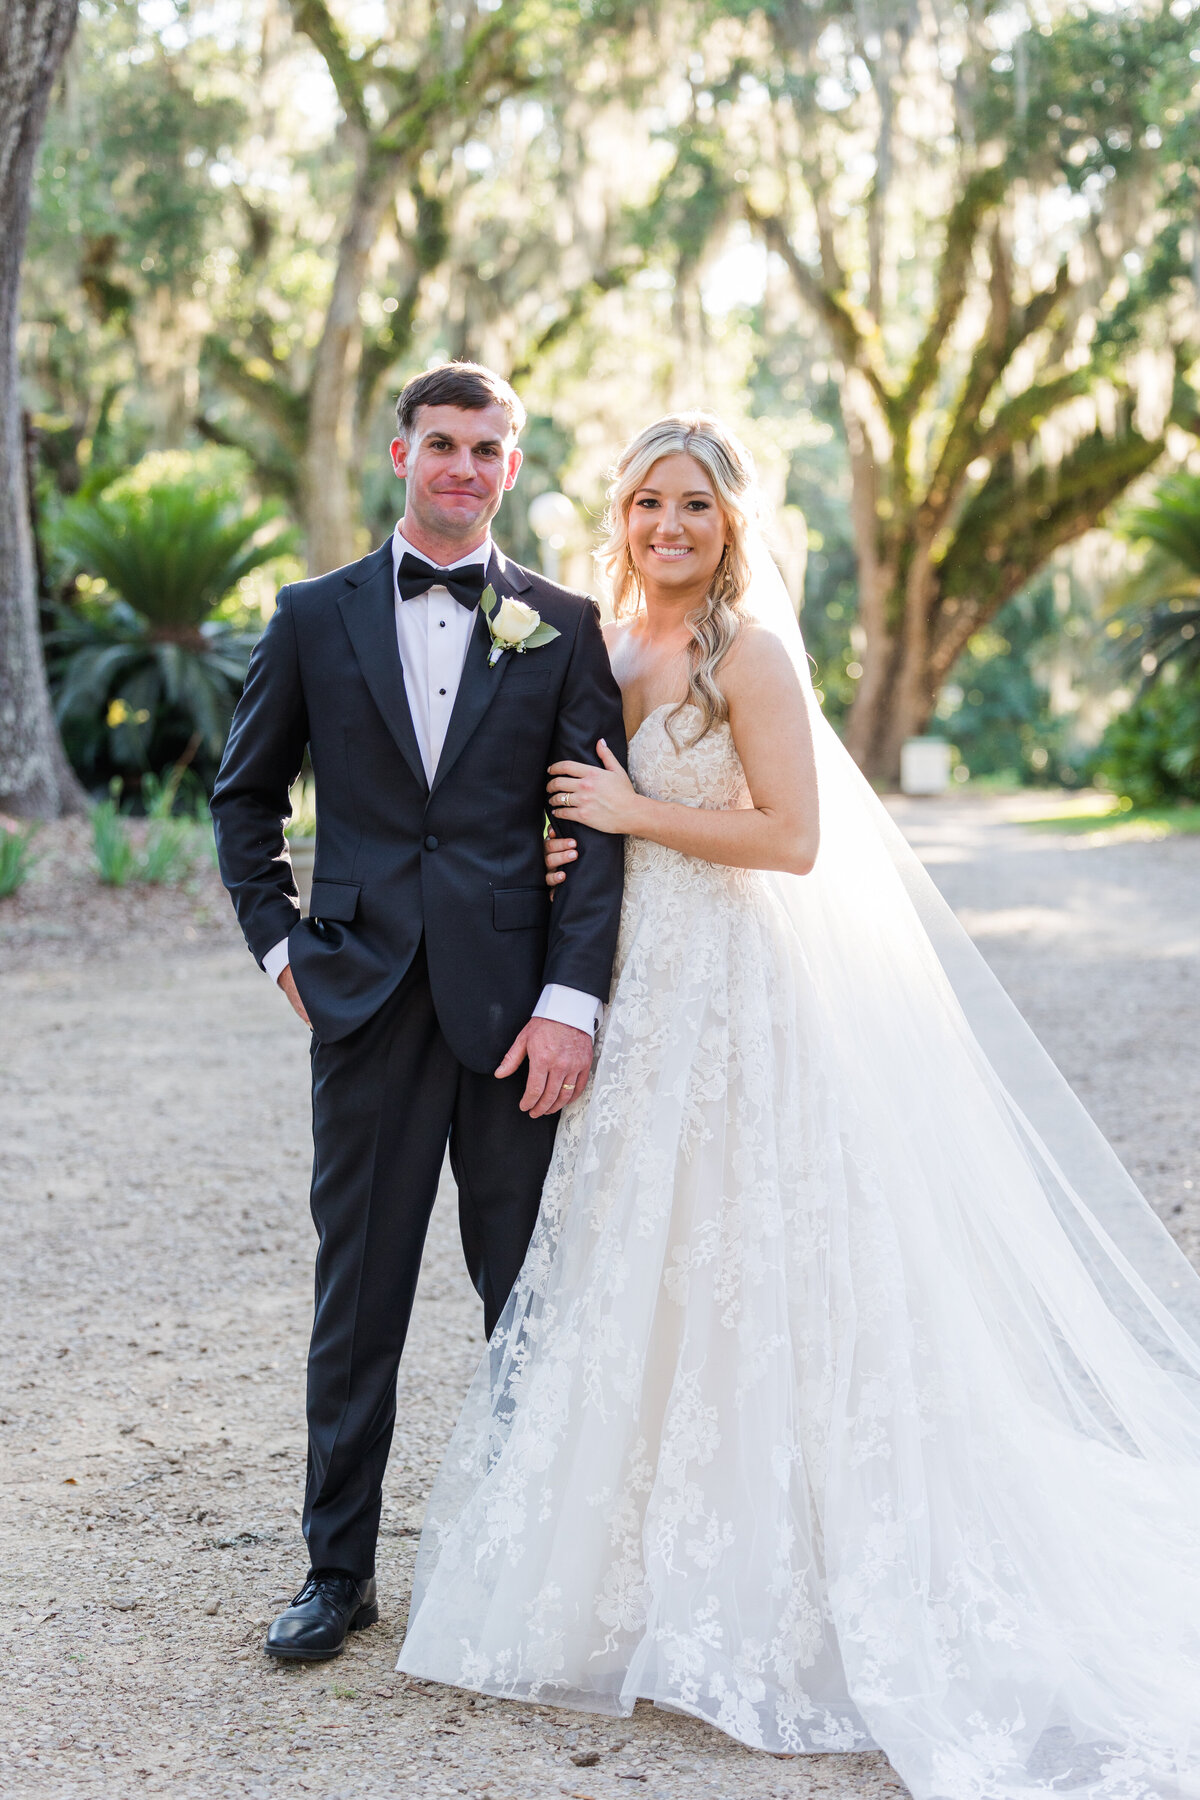 Mary Warren & Justin Wedding - Goodwood Museum - Taylor'd Southern Events - Maryland Wedding Photographer-0122